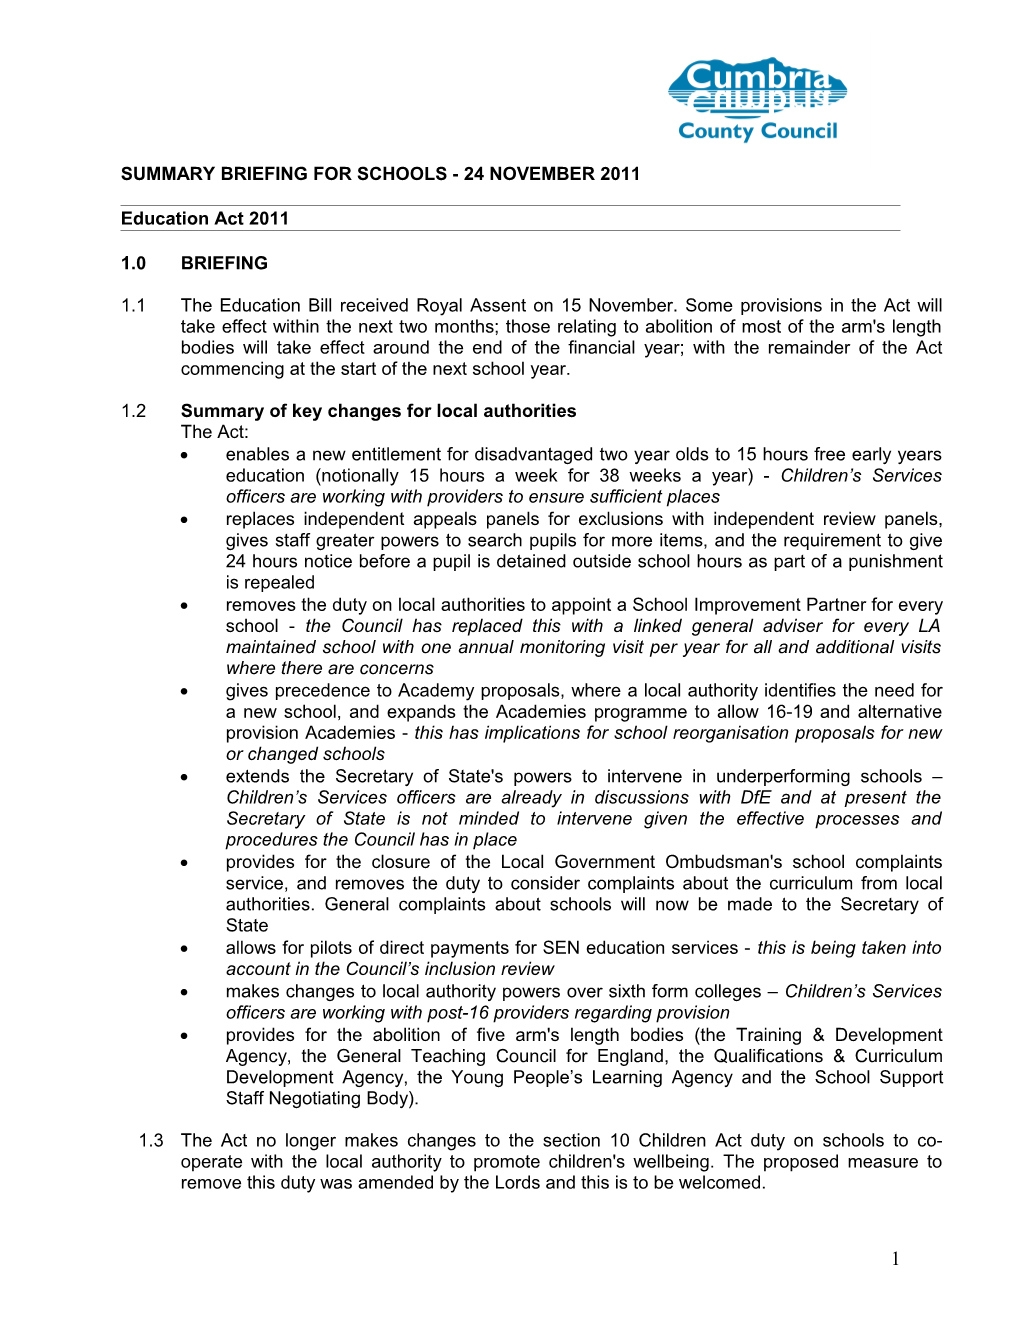 Summary Briefing for Schools - Education Act 2011